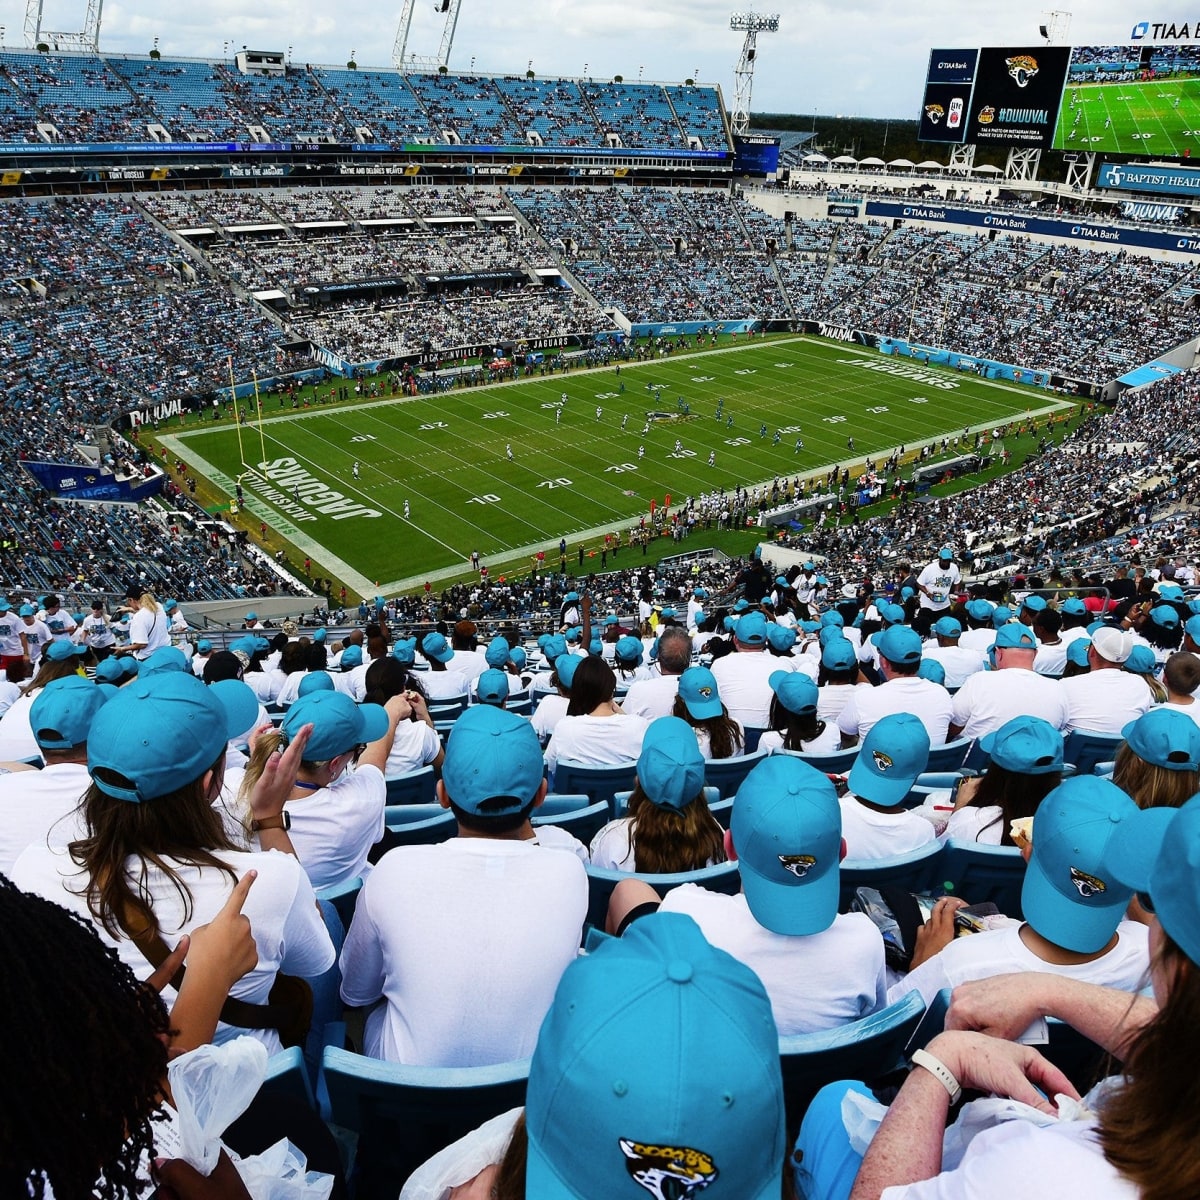 Jaguars Stadium Concession Stands Found Containing Dead Rodents